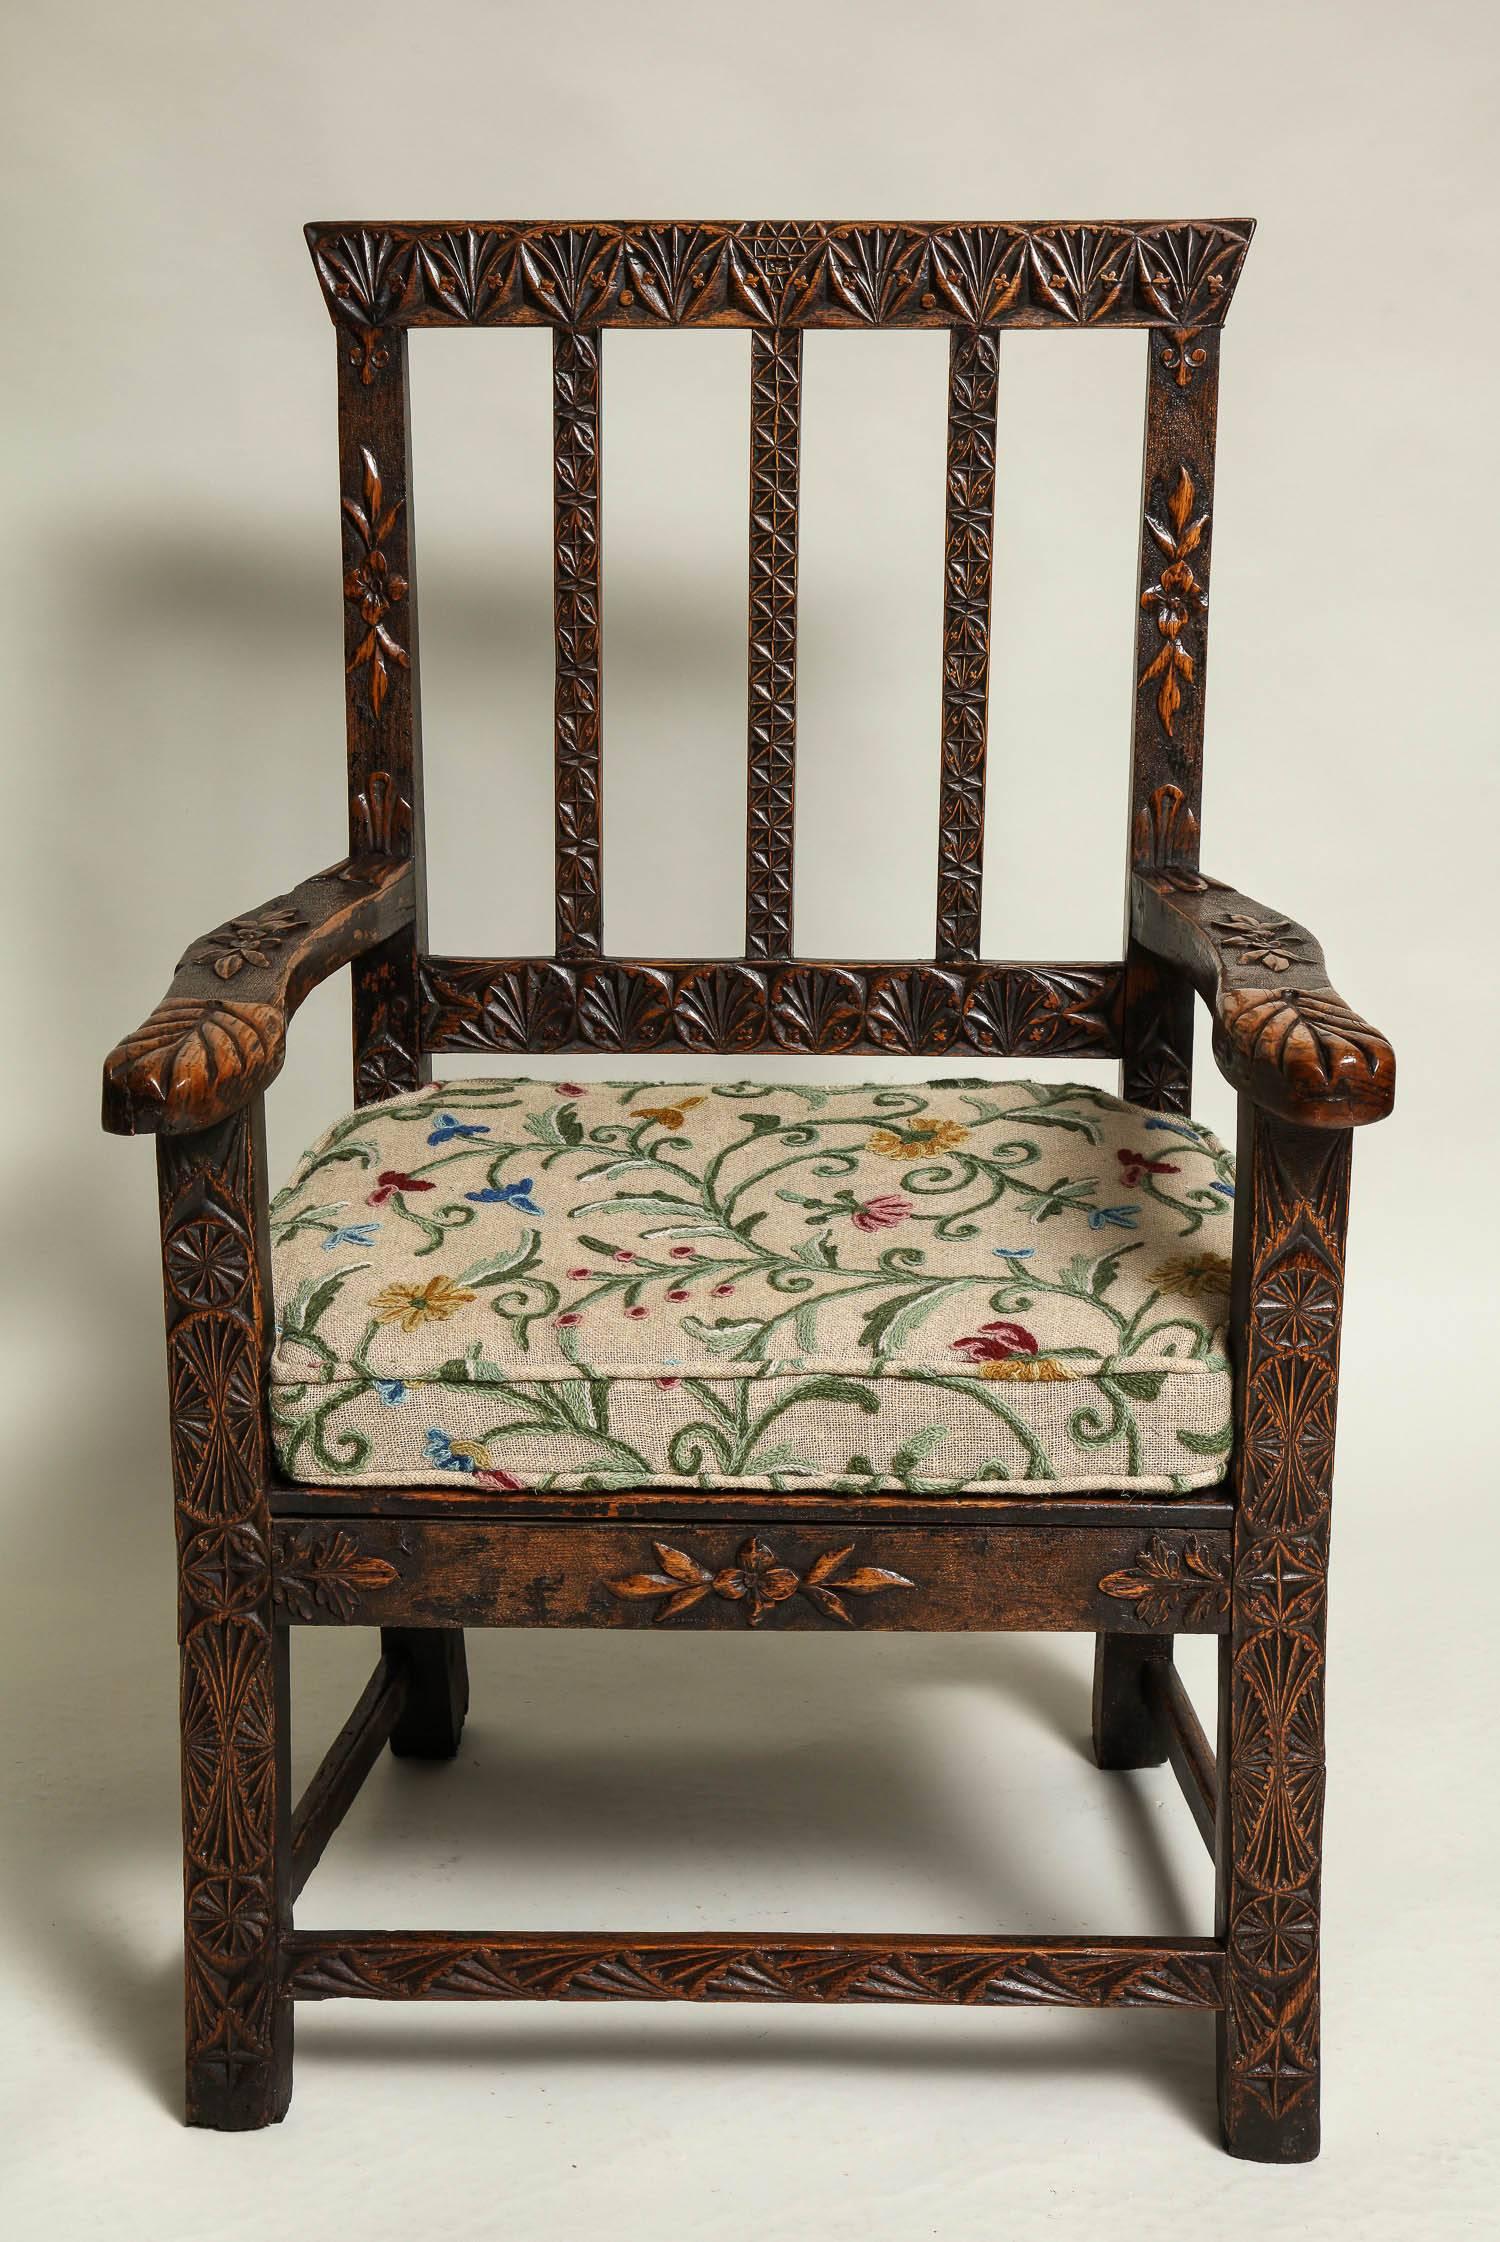 Most unusual English oak armchair with profuse carving to rails, crest and arms and possessing great color and patination. Custom crewelwork cushion over later plank seat, carved to simulate rest of chair.